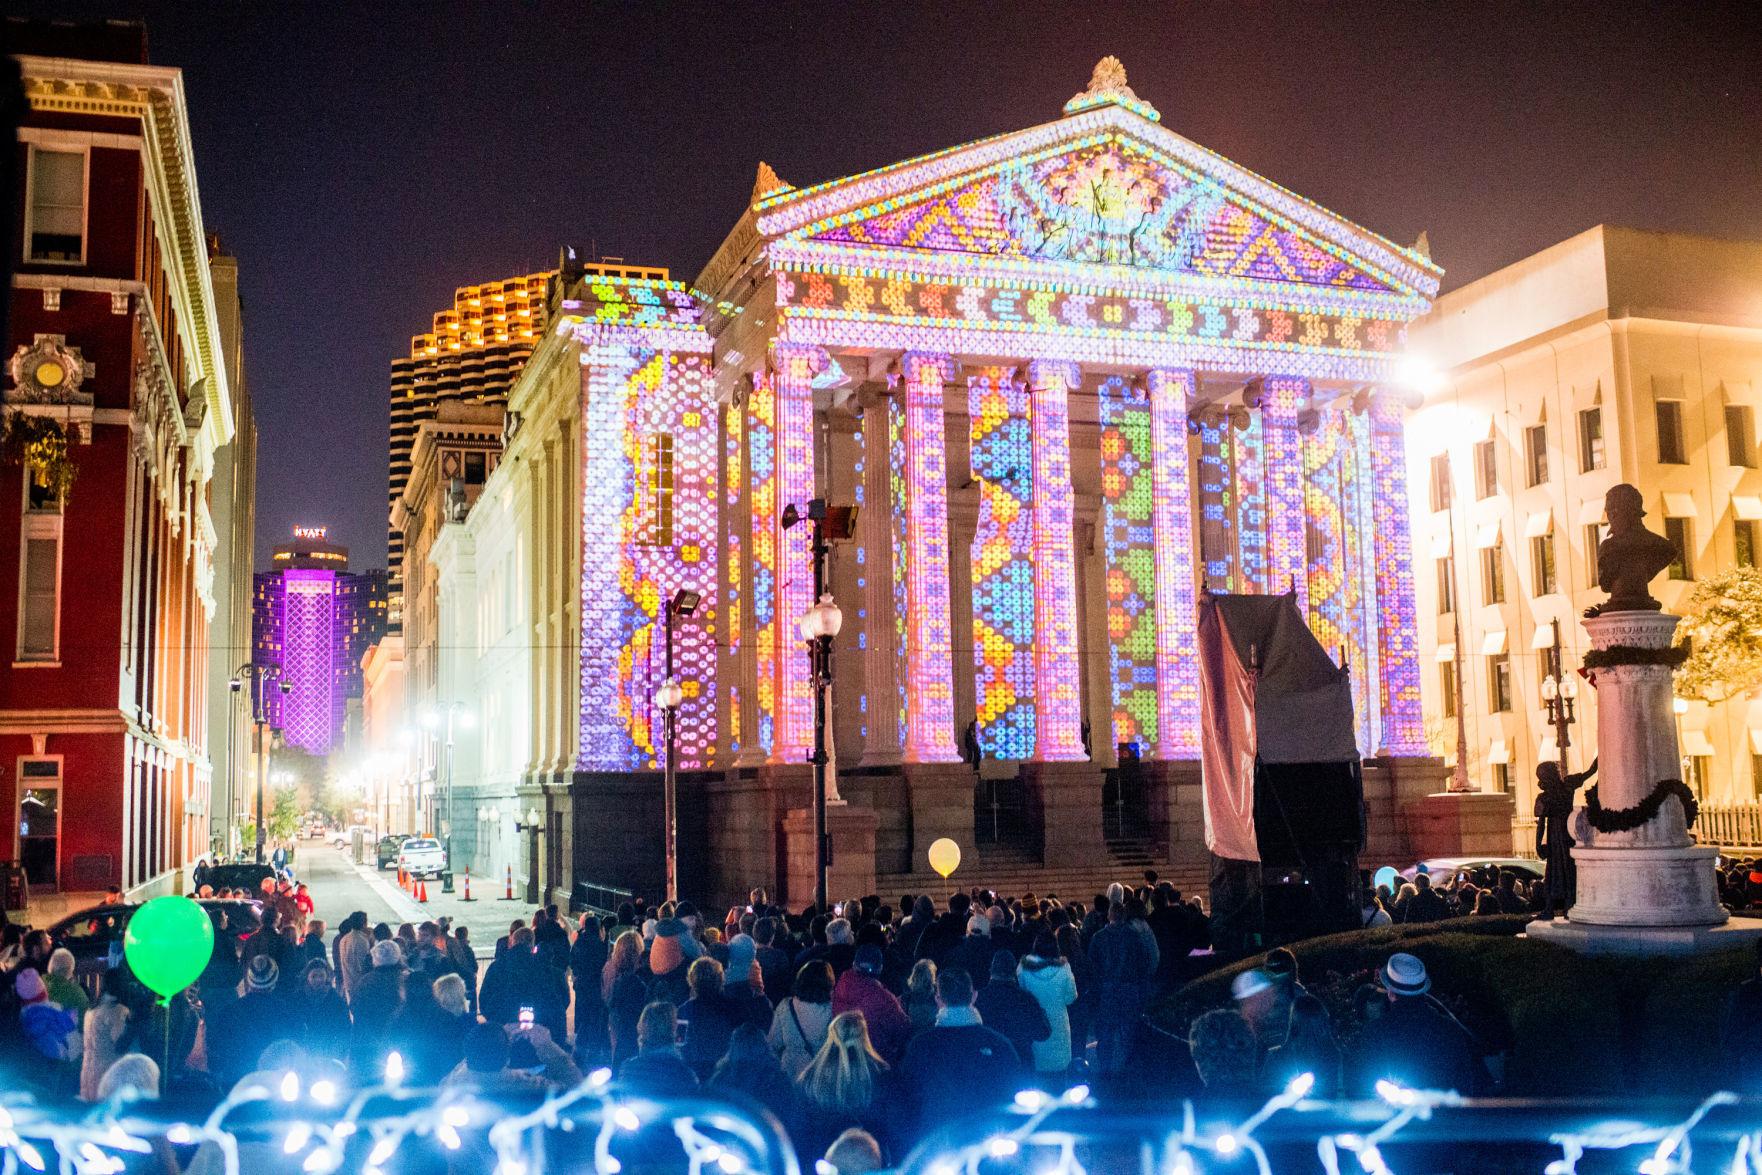 LUNA Fete lights up New Orleans with 2018 displays Events